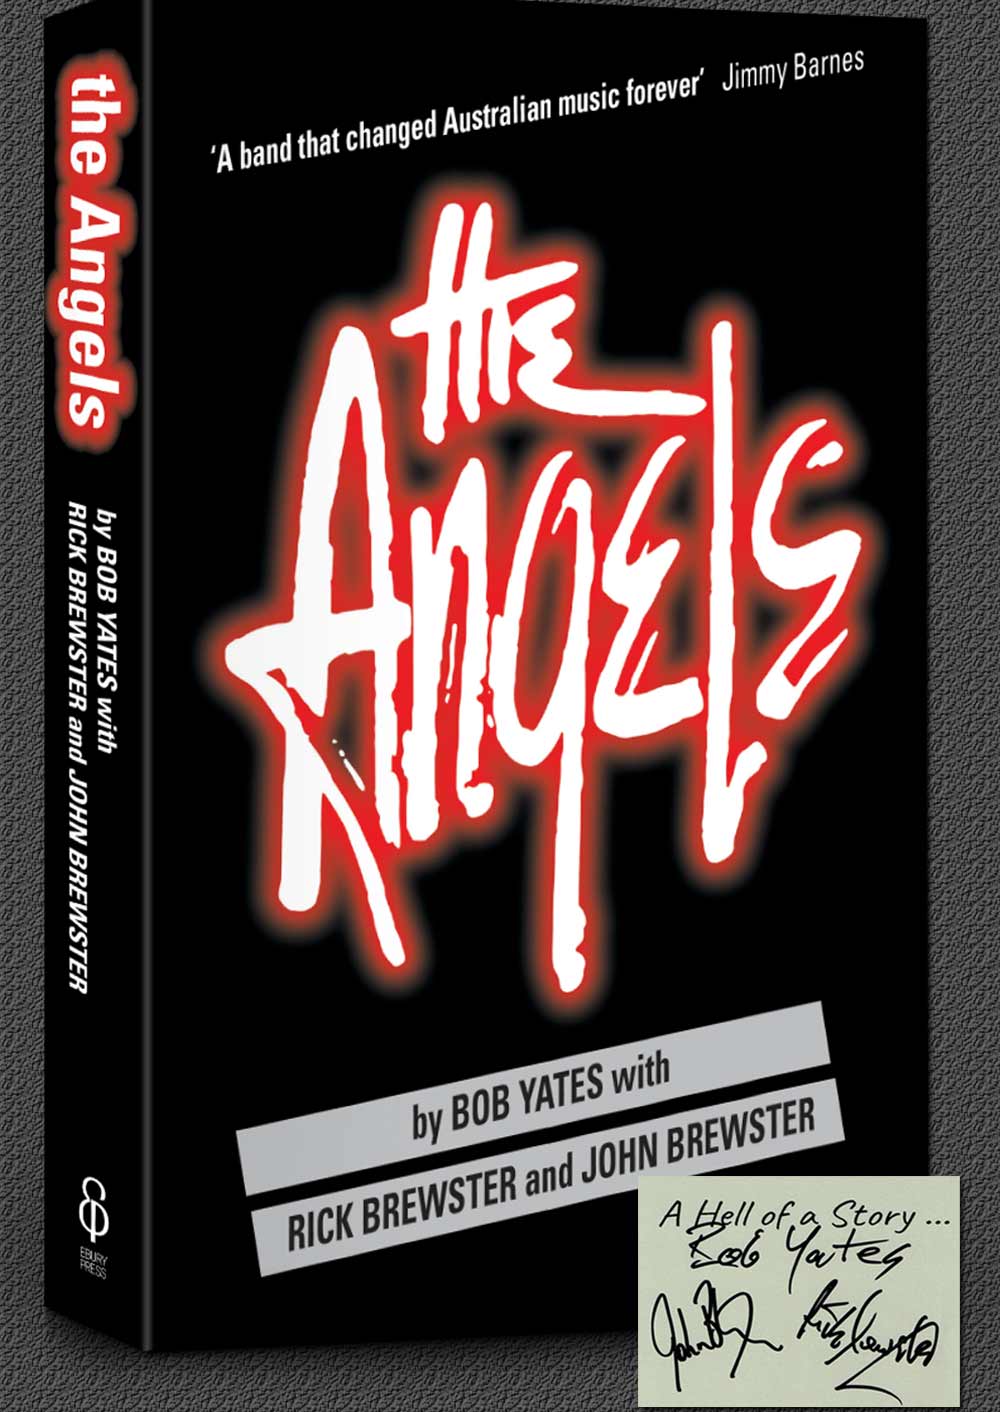 The Angels <br/> The Book – Bob Yates <br/>Signed Copy